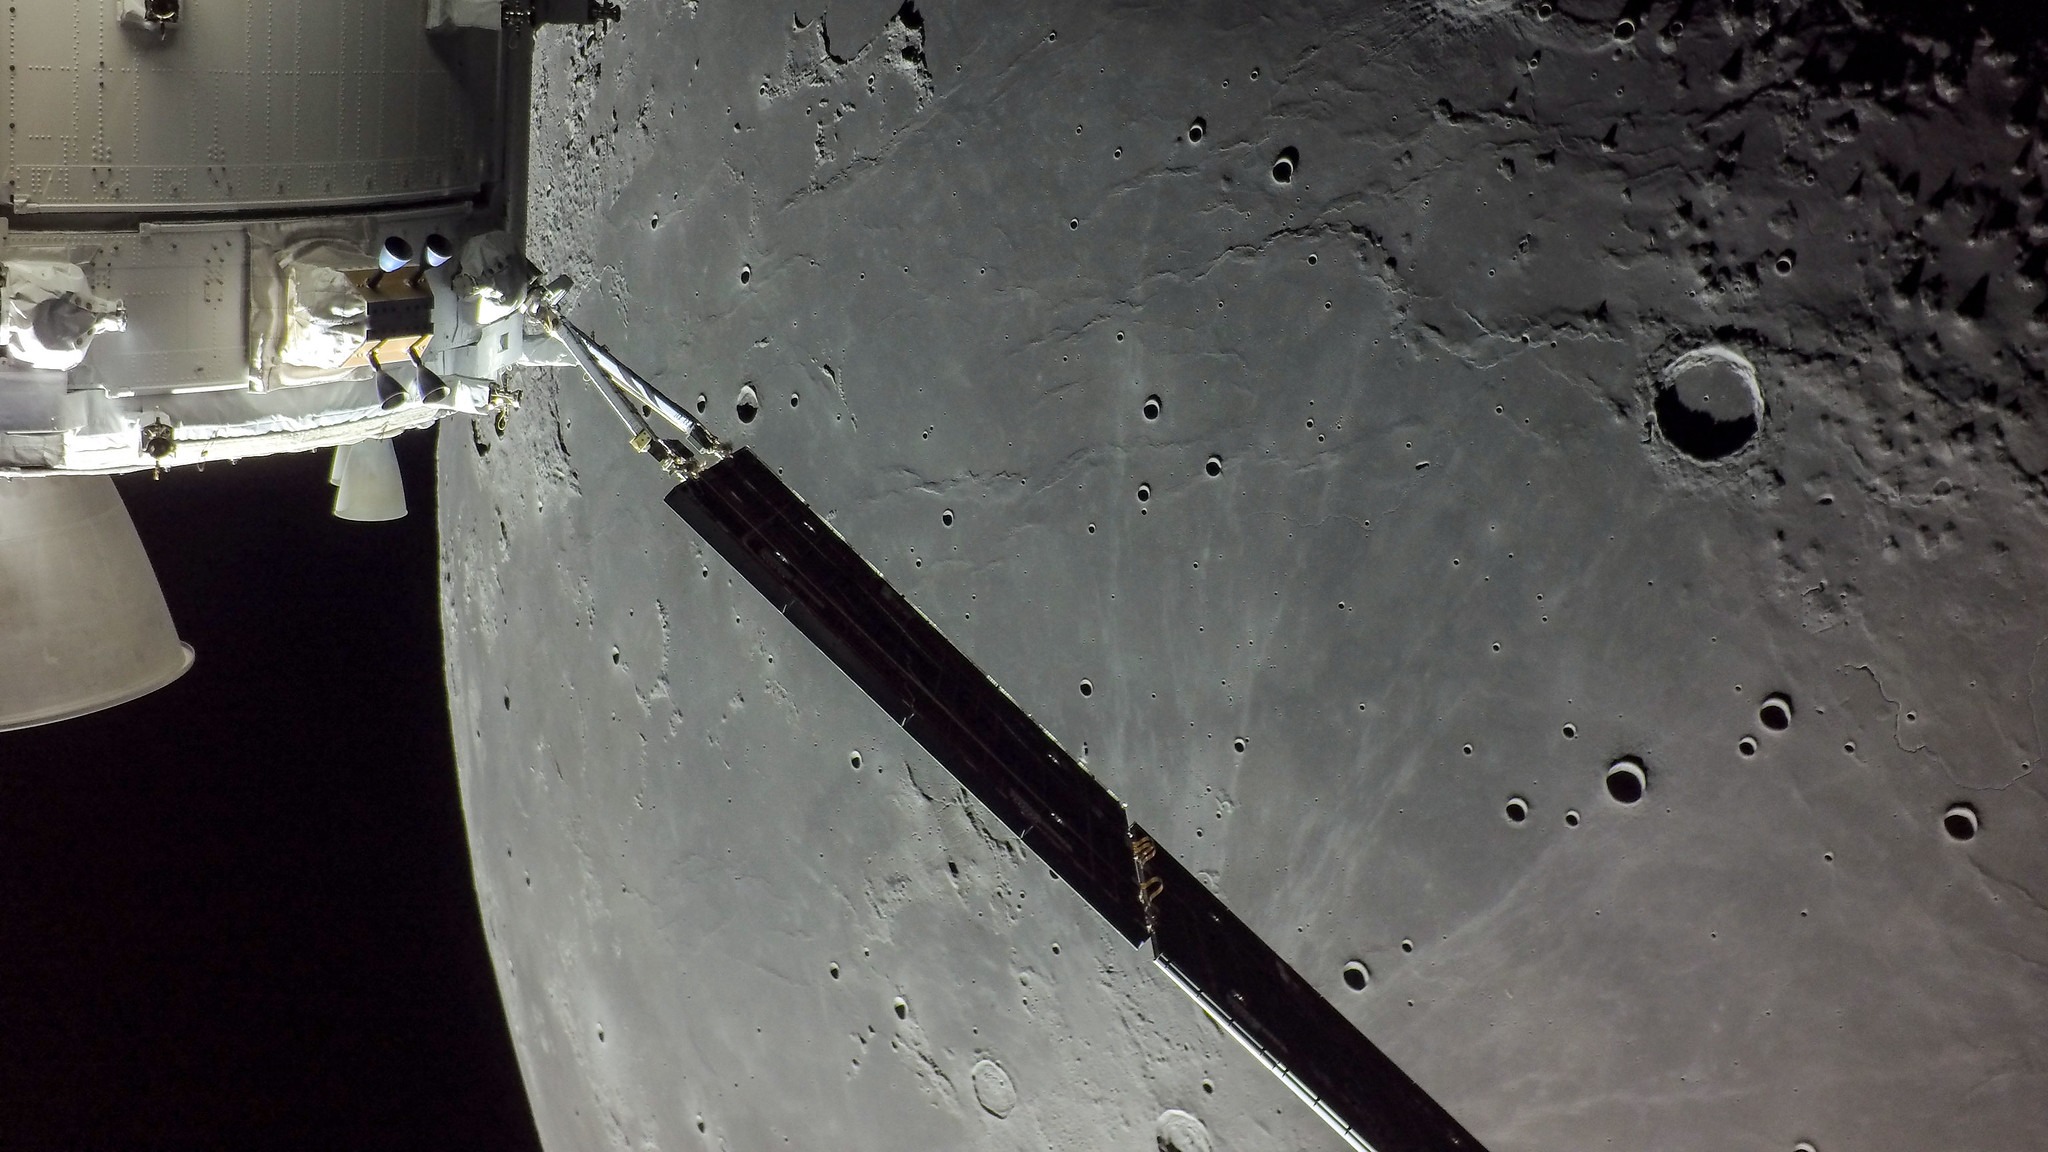 Artemis 1 Orion spacecraft captures moon craters in stunning flyby footage (video)